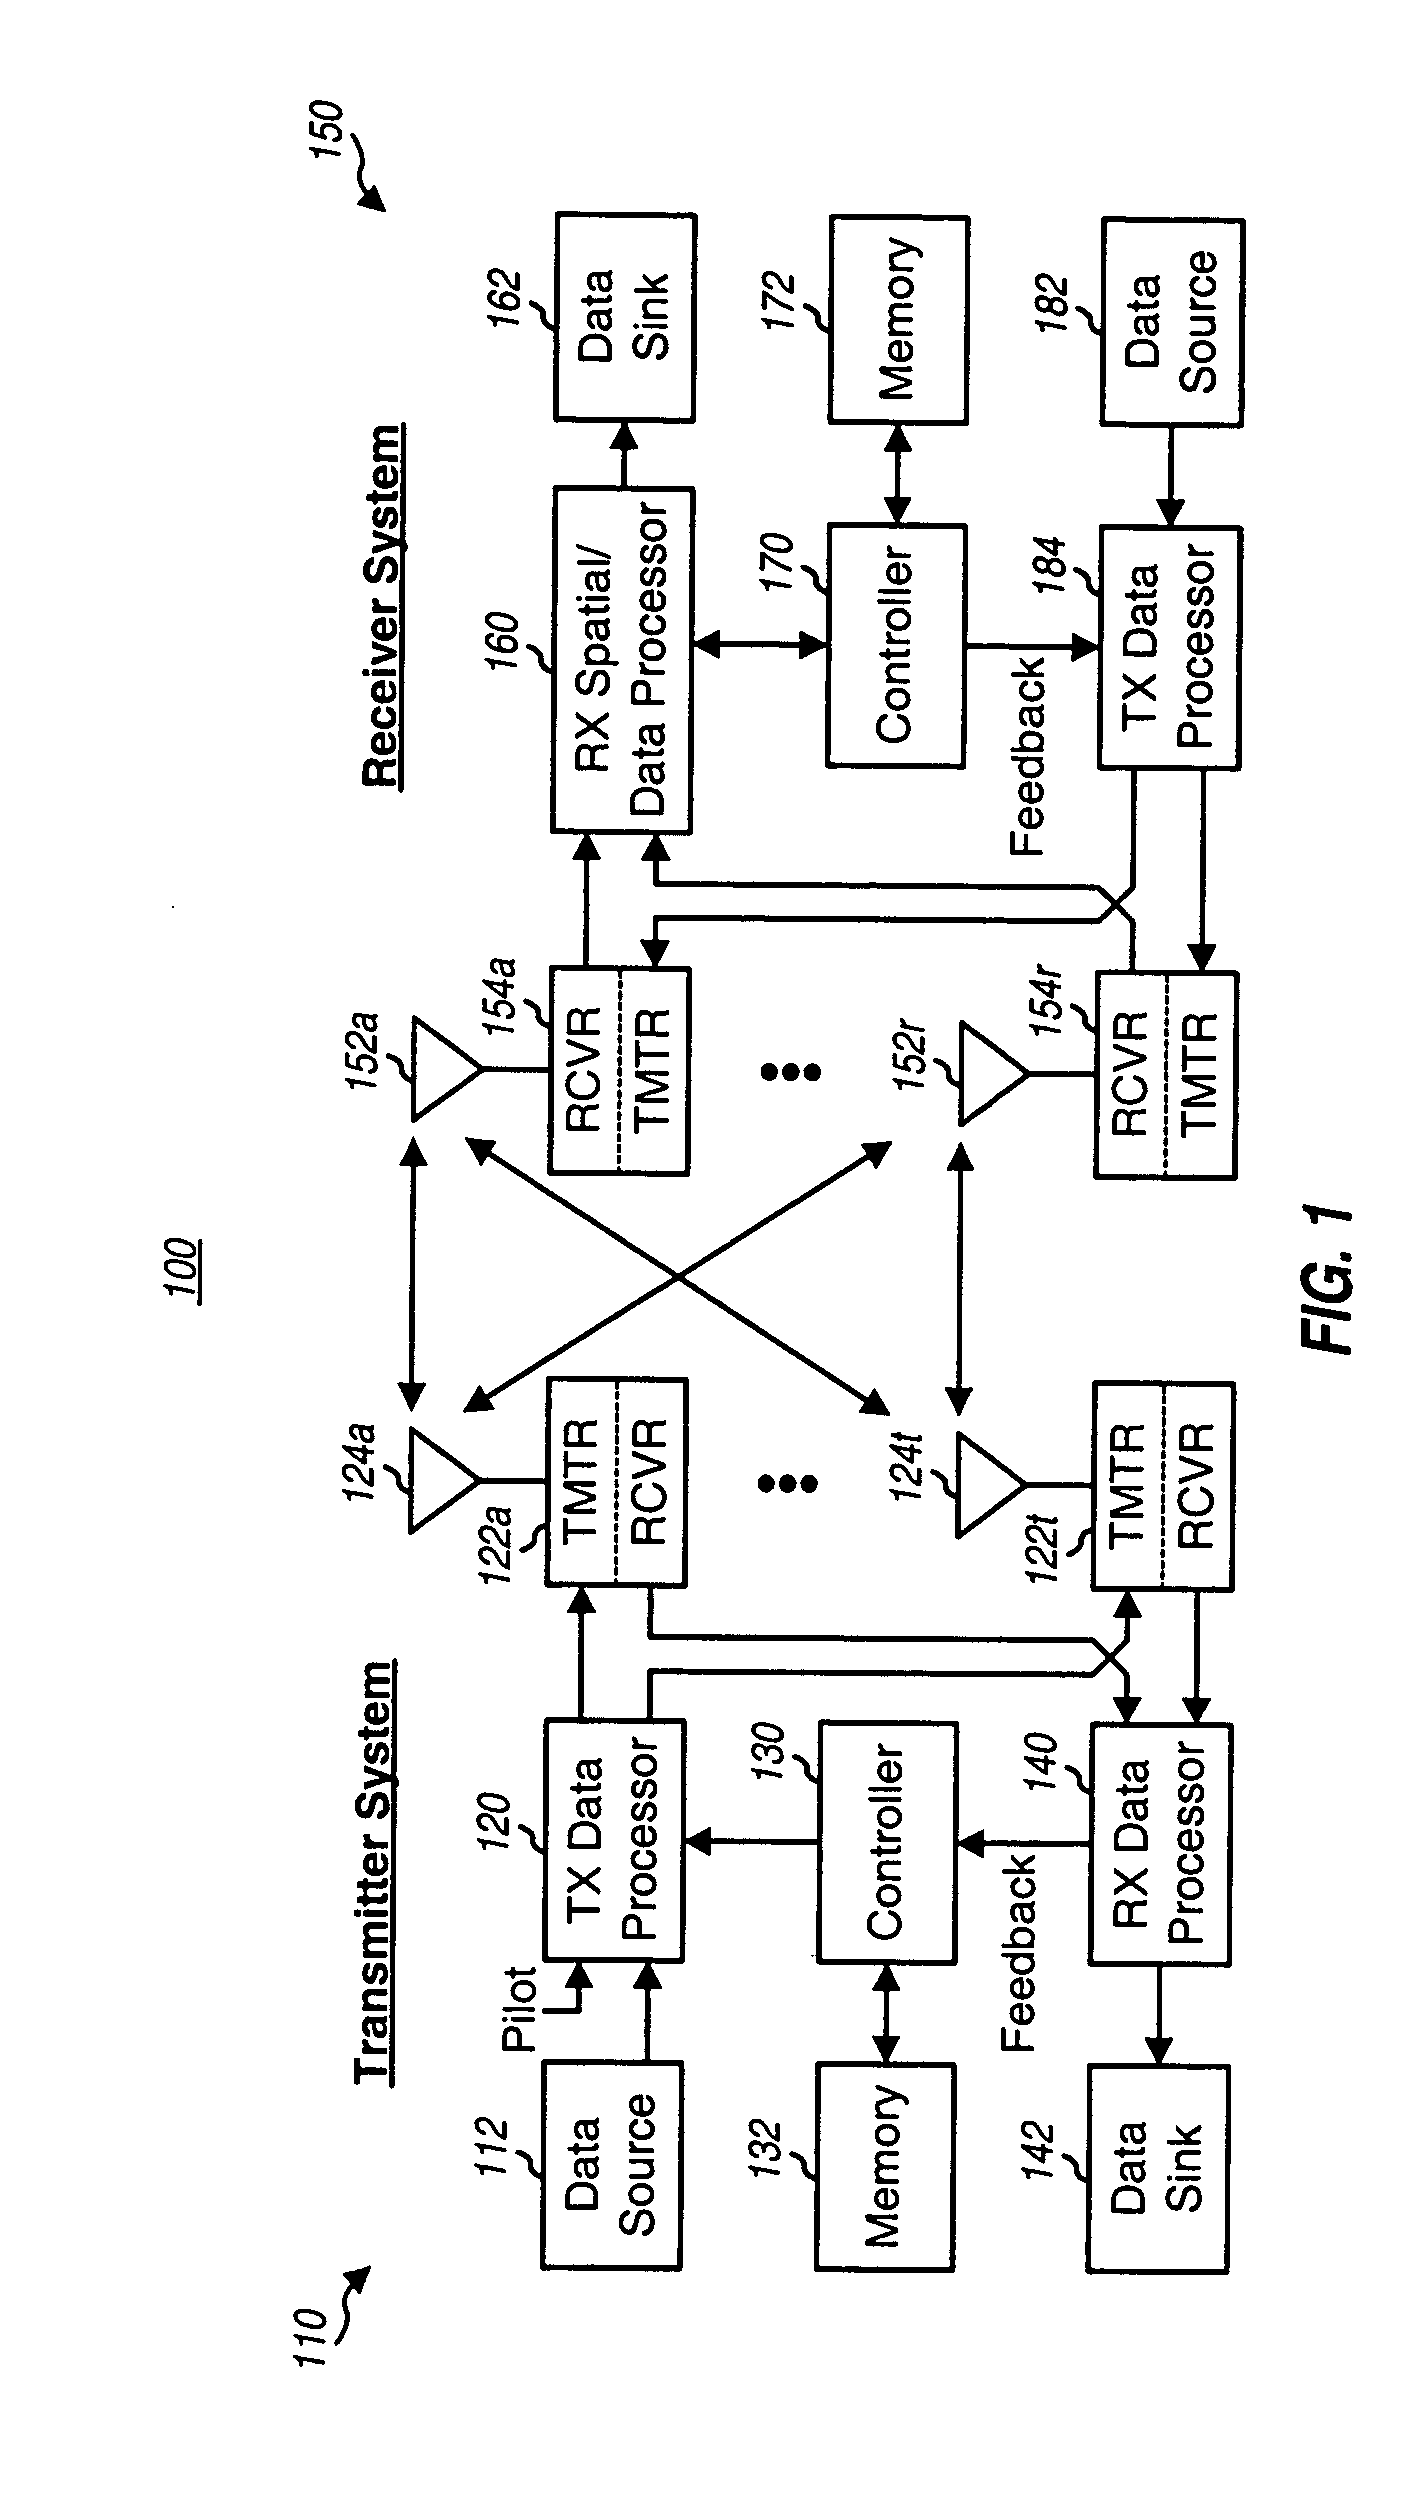 Successive interference cancellation receiver processing with selection diversity